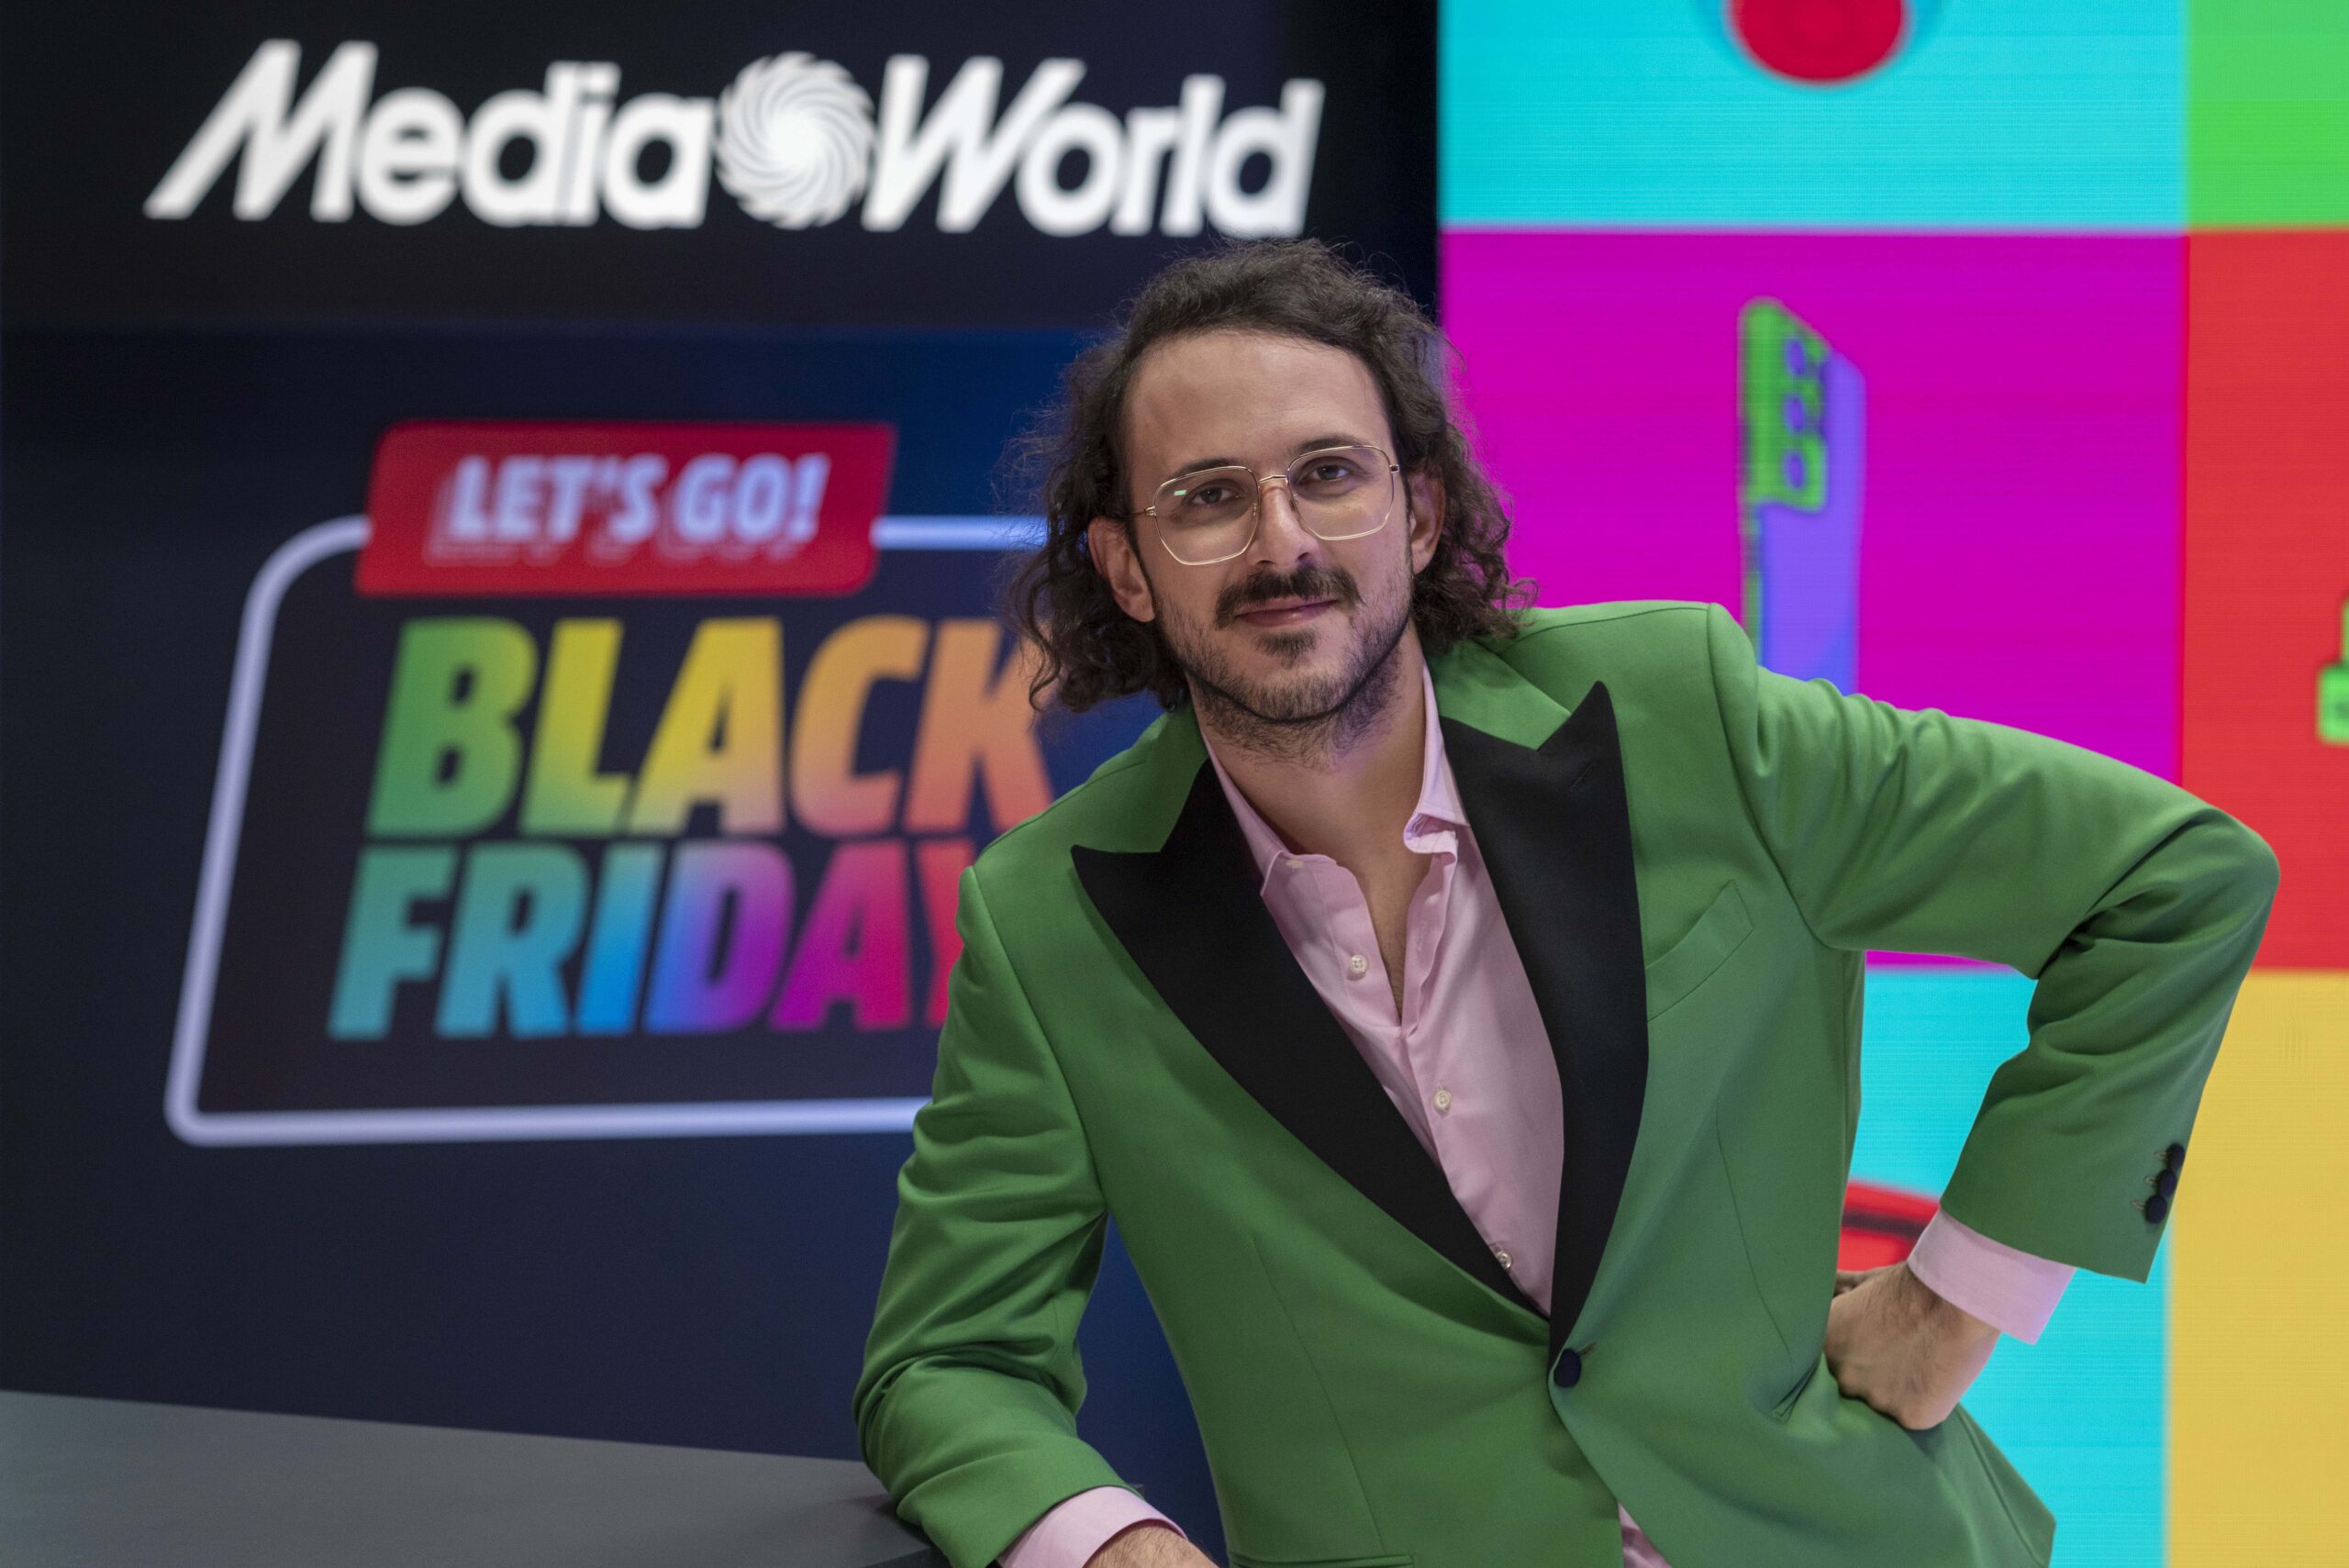 <strong>MediaWorld launches “The most colourful Black Friday ever”:  the new innovative  omnichannel campaign created by Armando Testa now on air – colouring the whole month of November with discounts and promotions.  </strong>